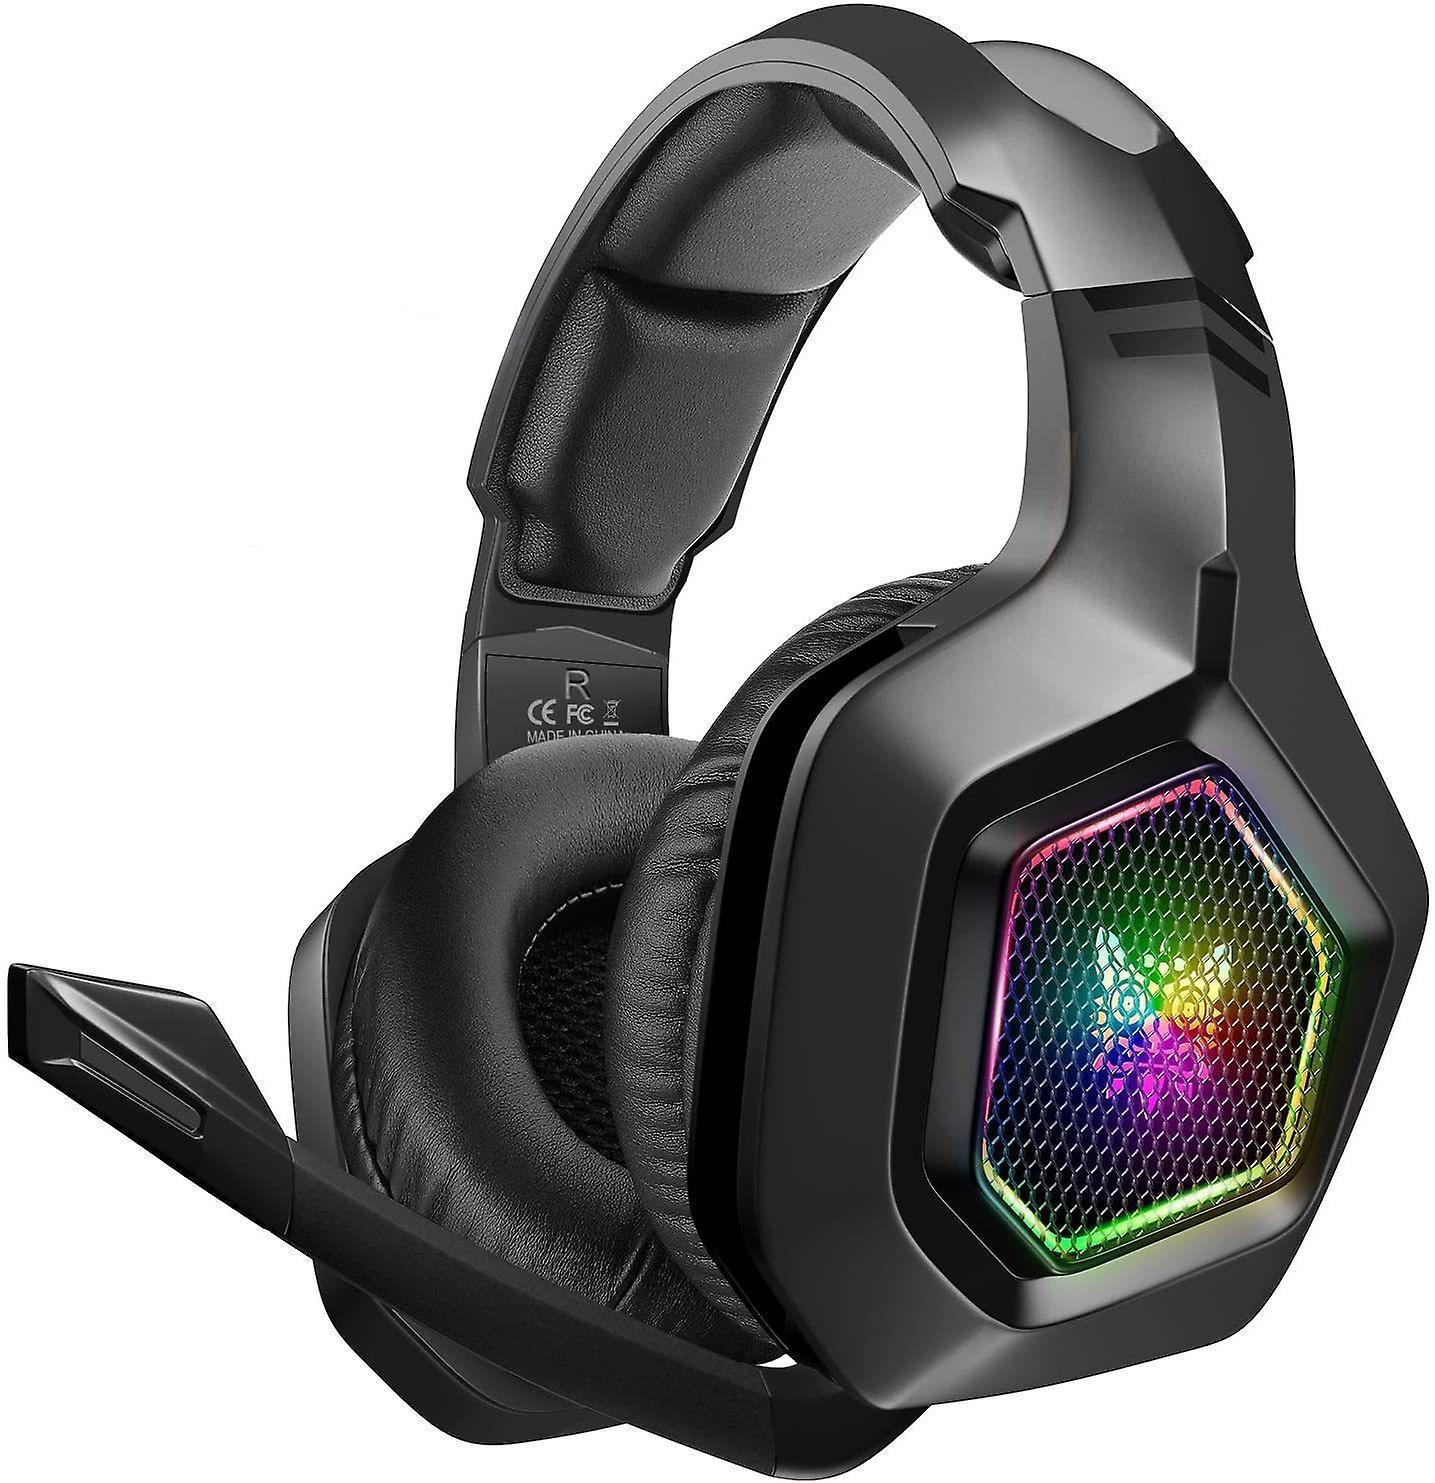 Gaming headset for PS4, PS5, Surround Stereo 3.5mm Gaming Headphones with Mic and RGB Rainbow Light for Xbox One Nintendo Switch PC Laptop Mac(black)